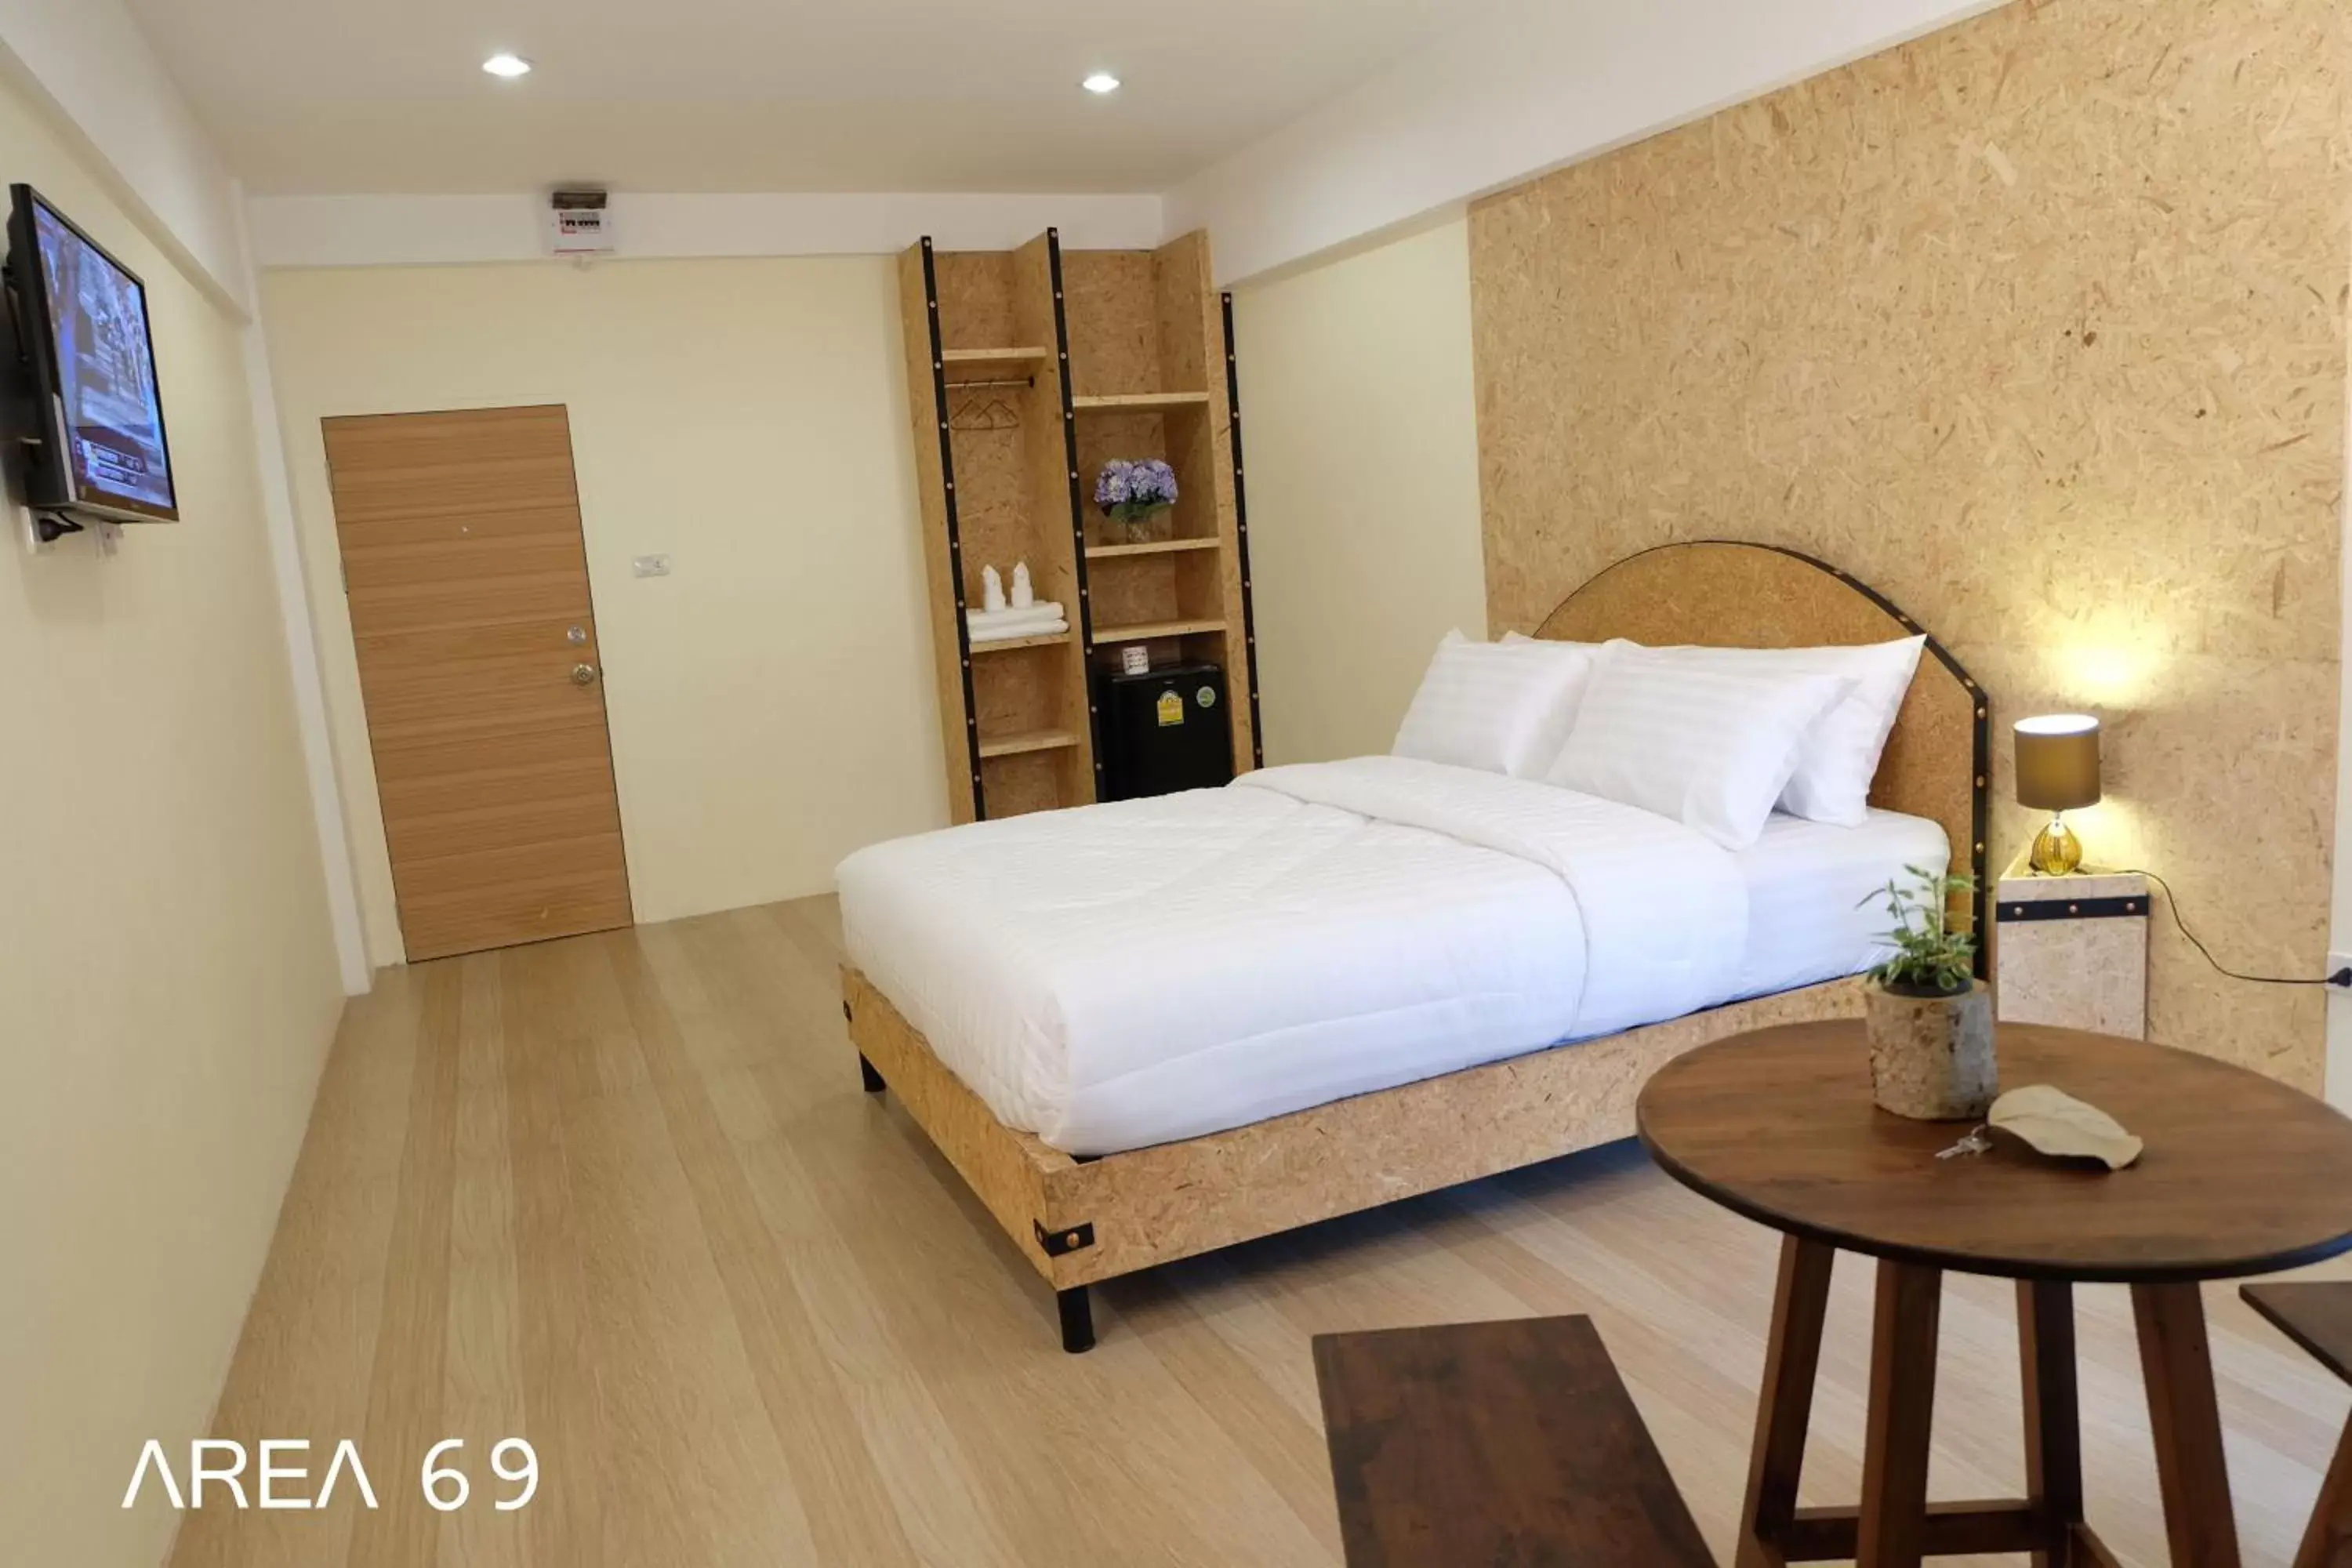 Bed, Room Photo in Area 69 (Don Muang Airport)